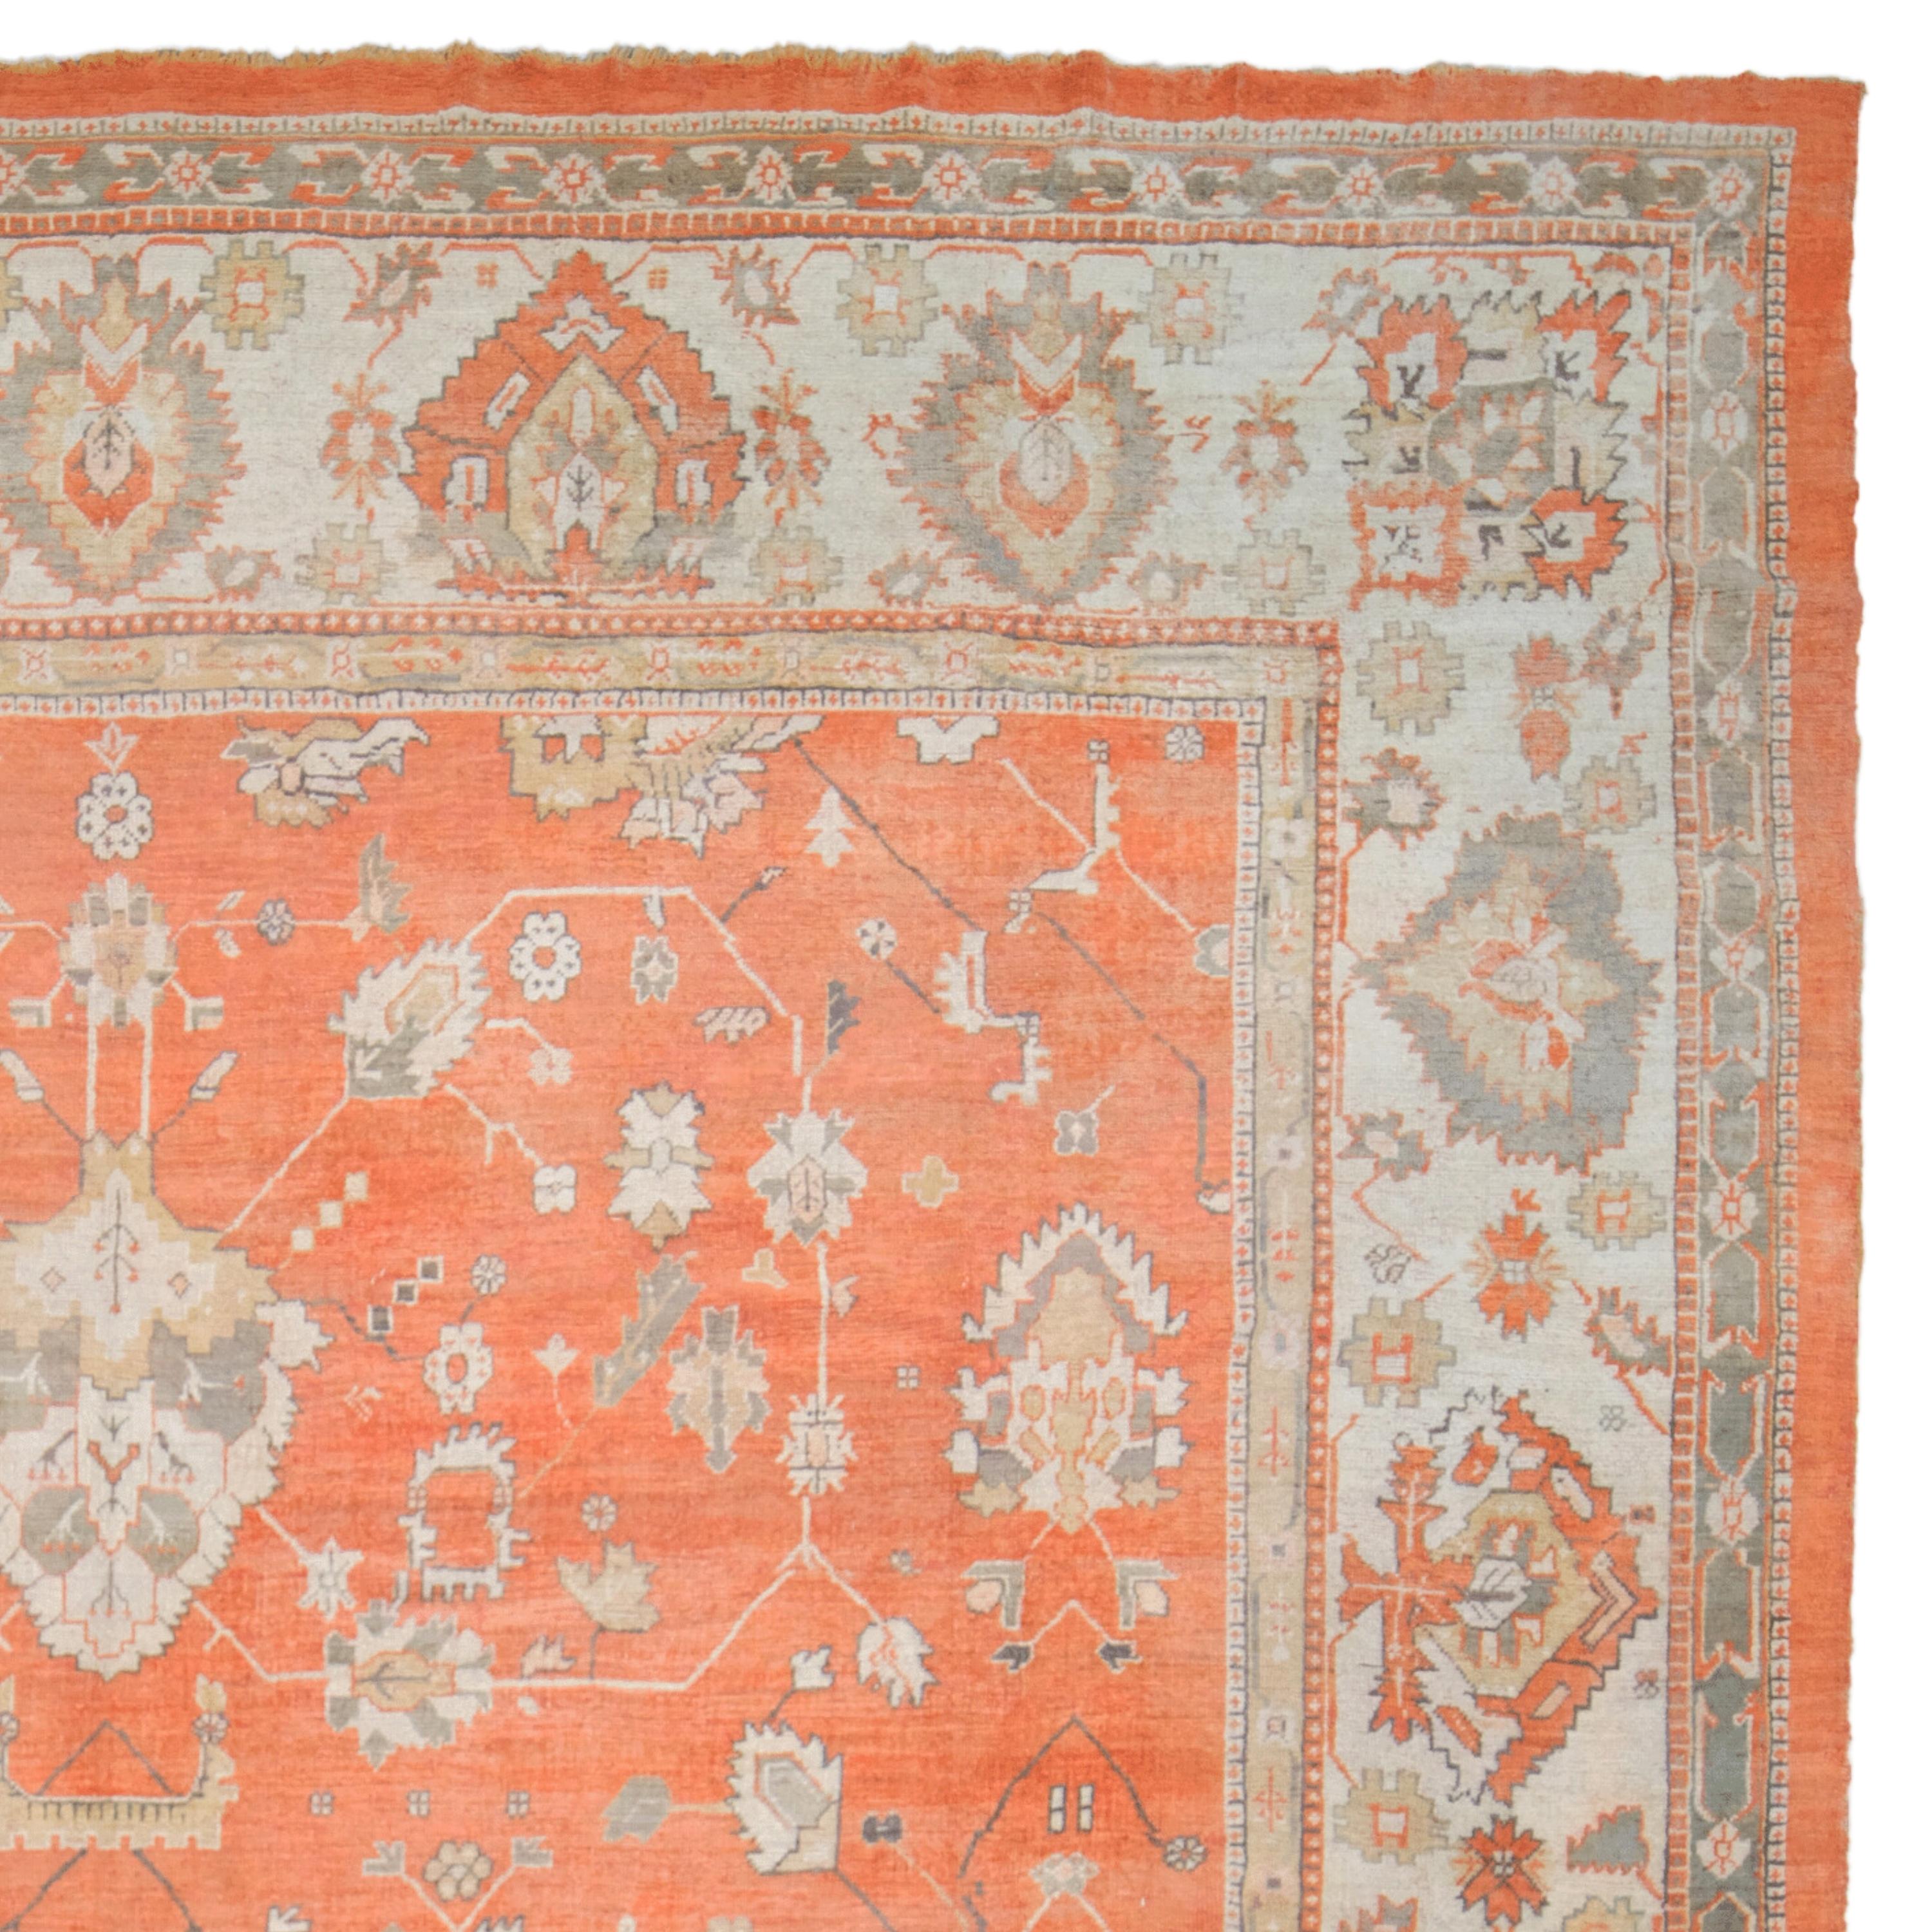 Late of 19th Century Ushak Carpet - Antique Anatolian Carpet In Good Condition For Sale In Sultanahmet, 34